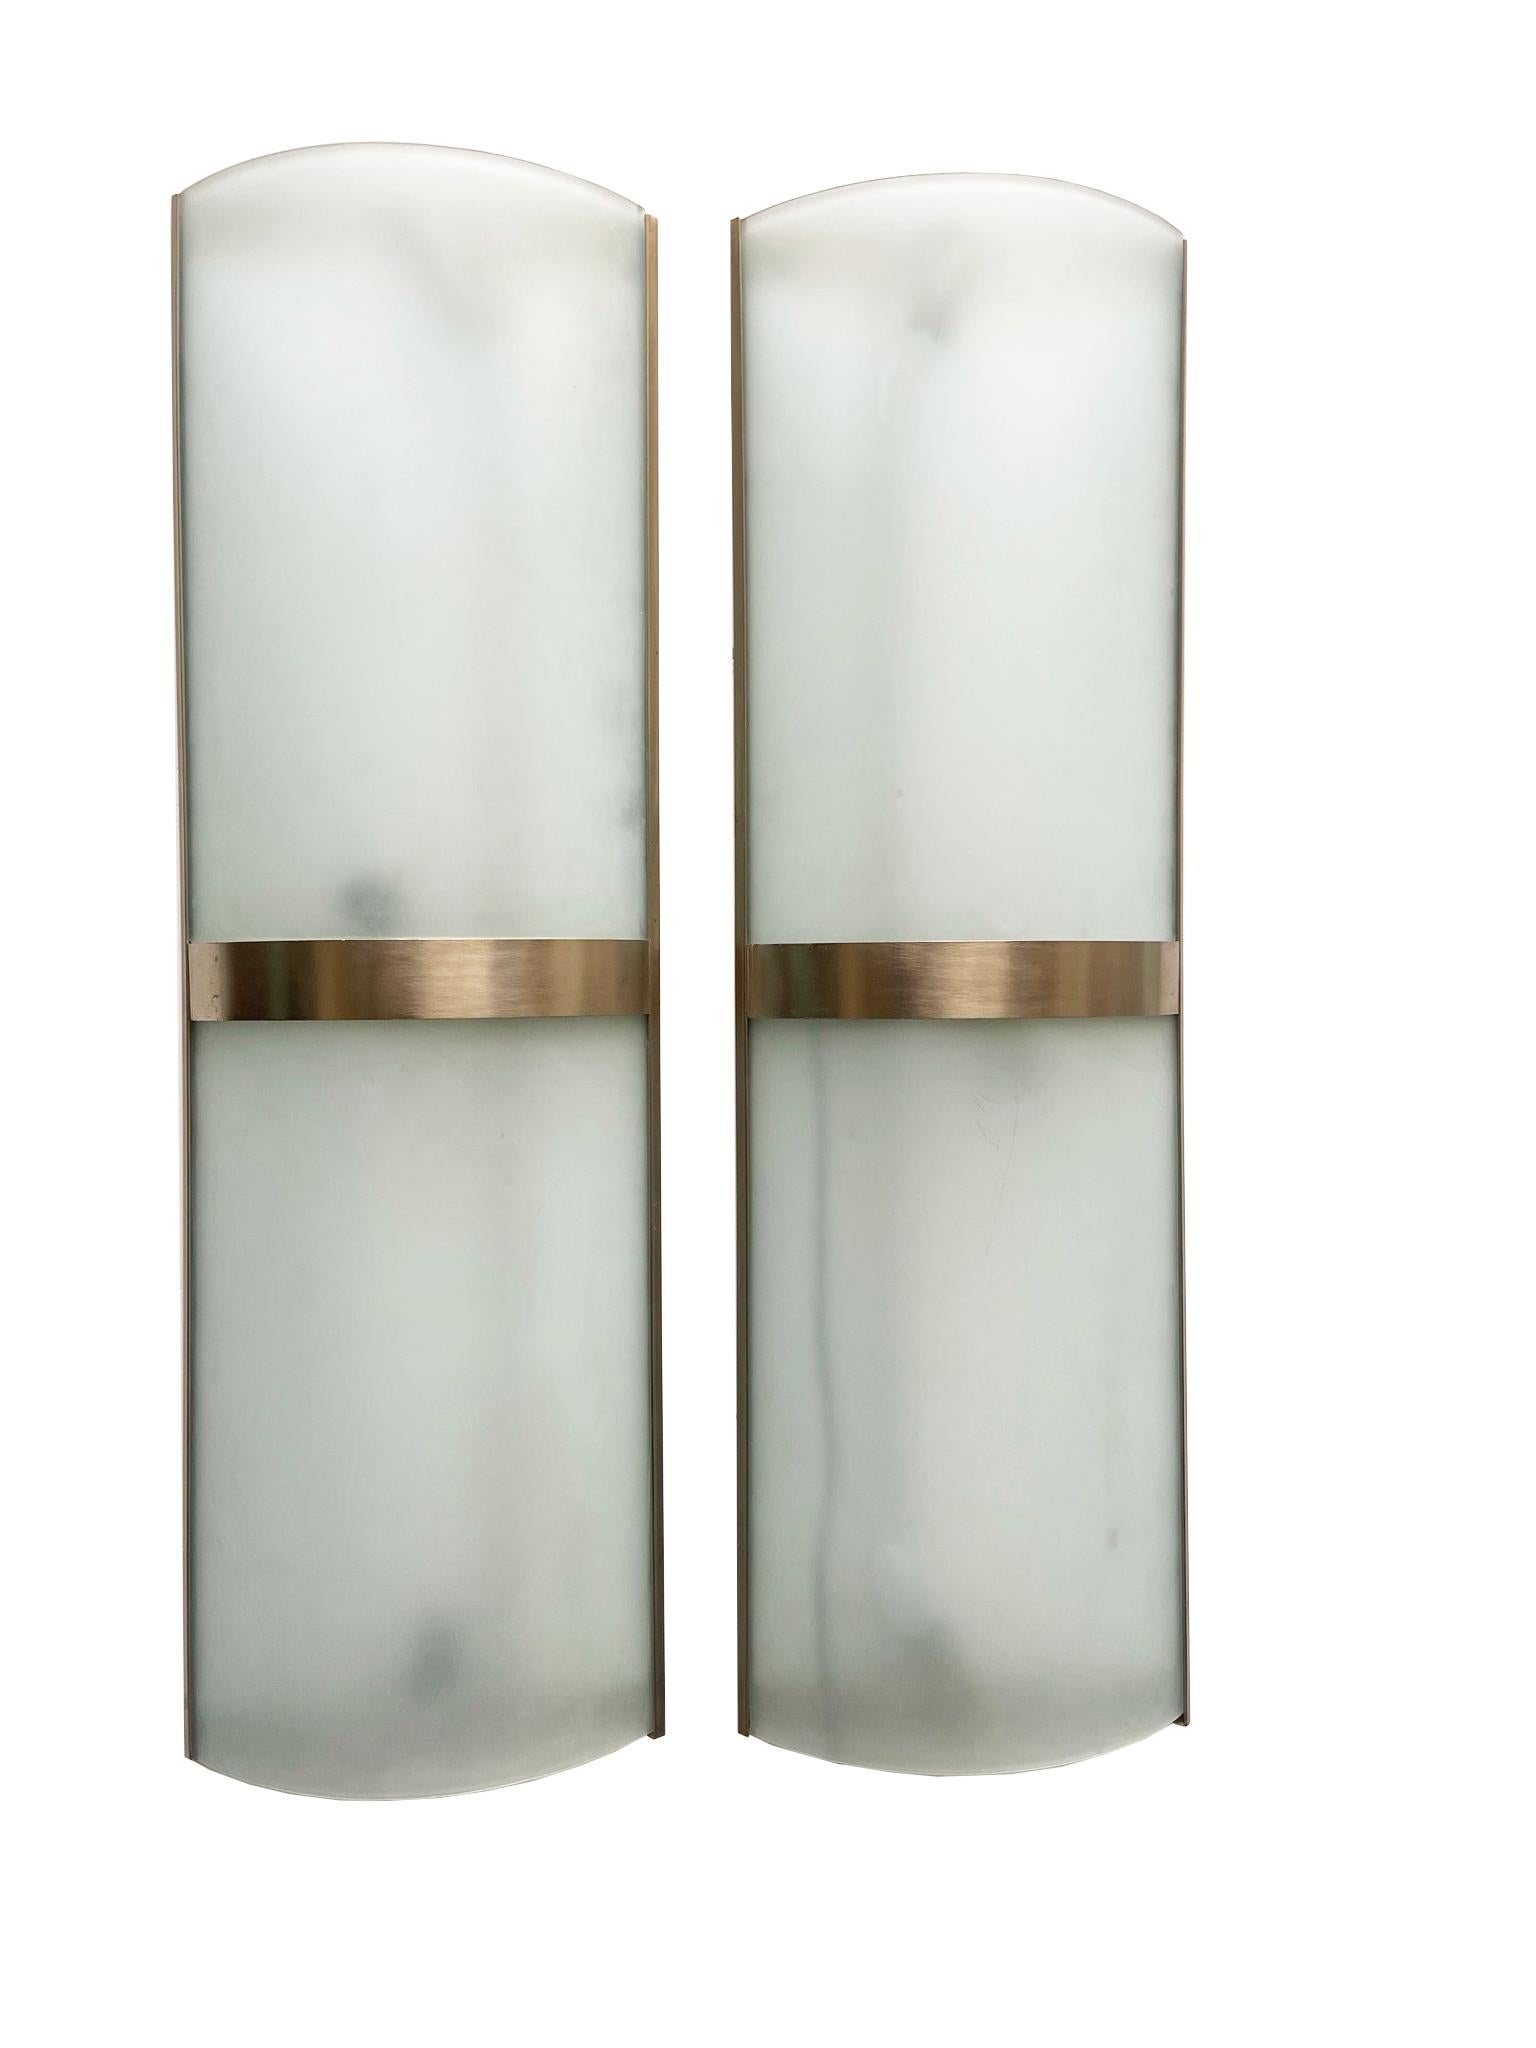 Set of 9 wall lamps with stainless steel frame and frosted glass Fontana Arte style.

Measures large cm. H.100 x 30 x 10

Small cm. H.40 x 40 x 10.